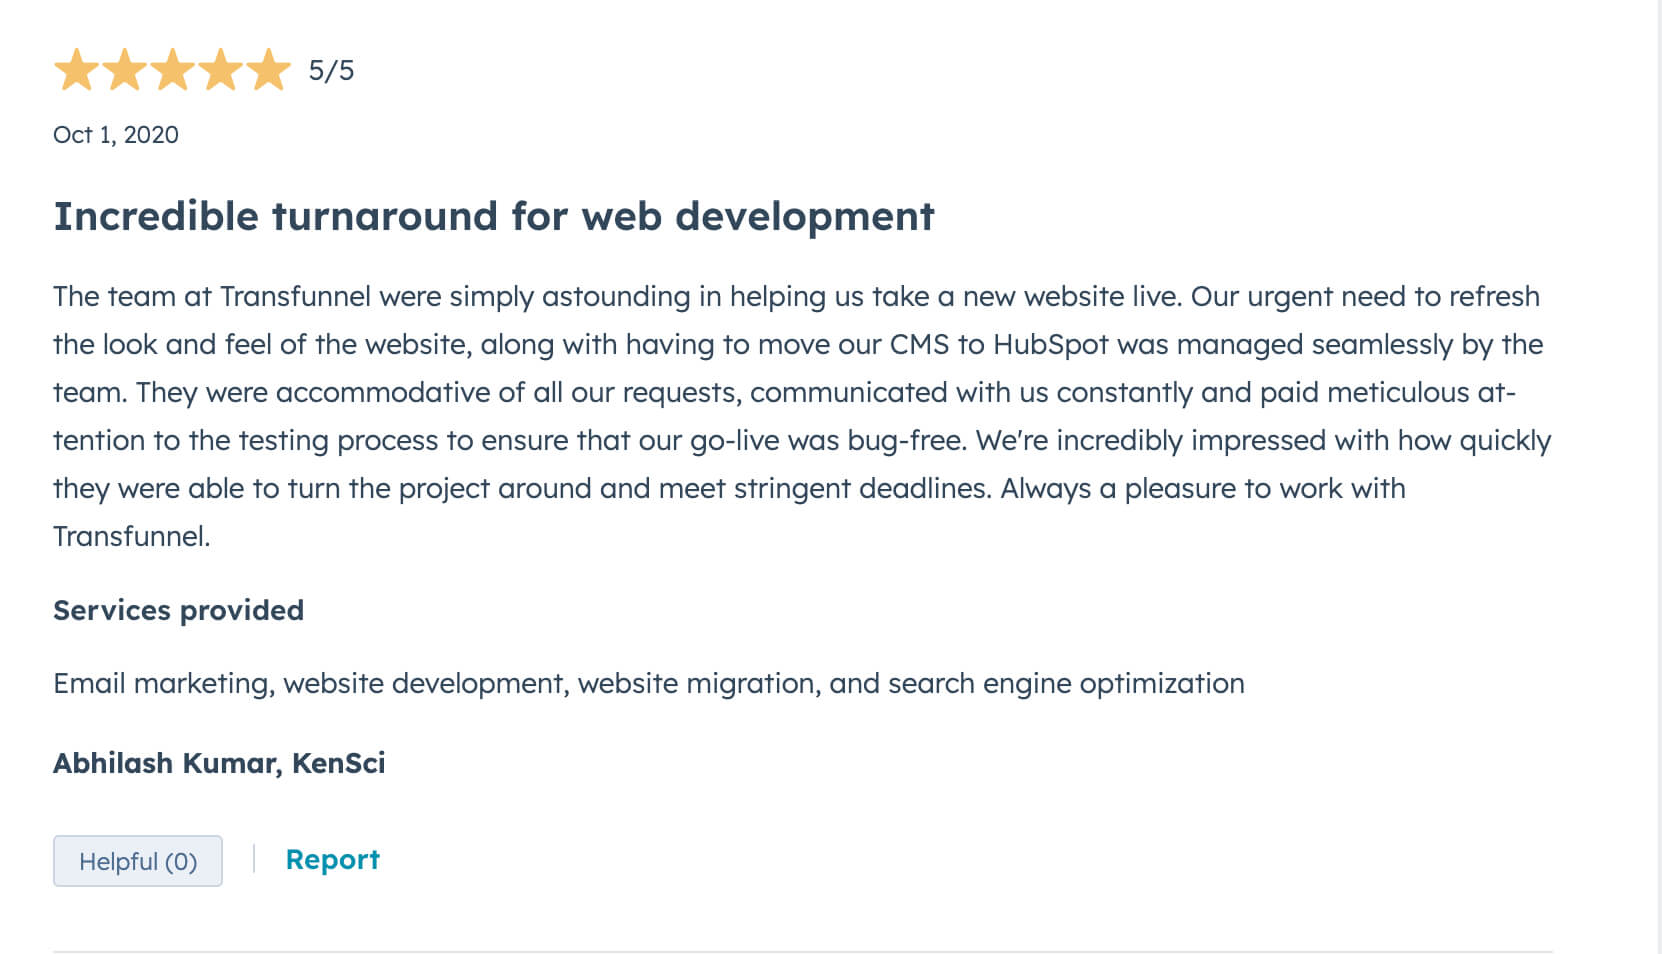 Incredible Turnaround for Web Development - 5 Star Review